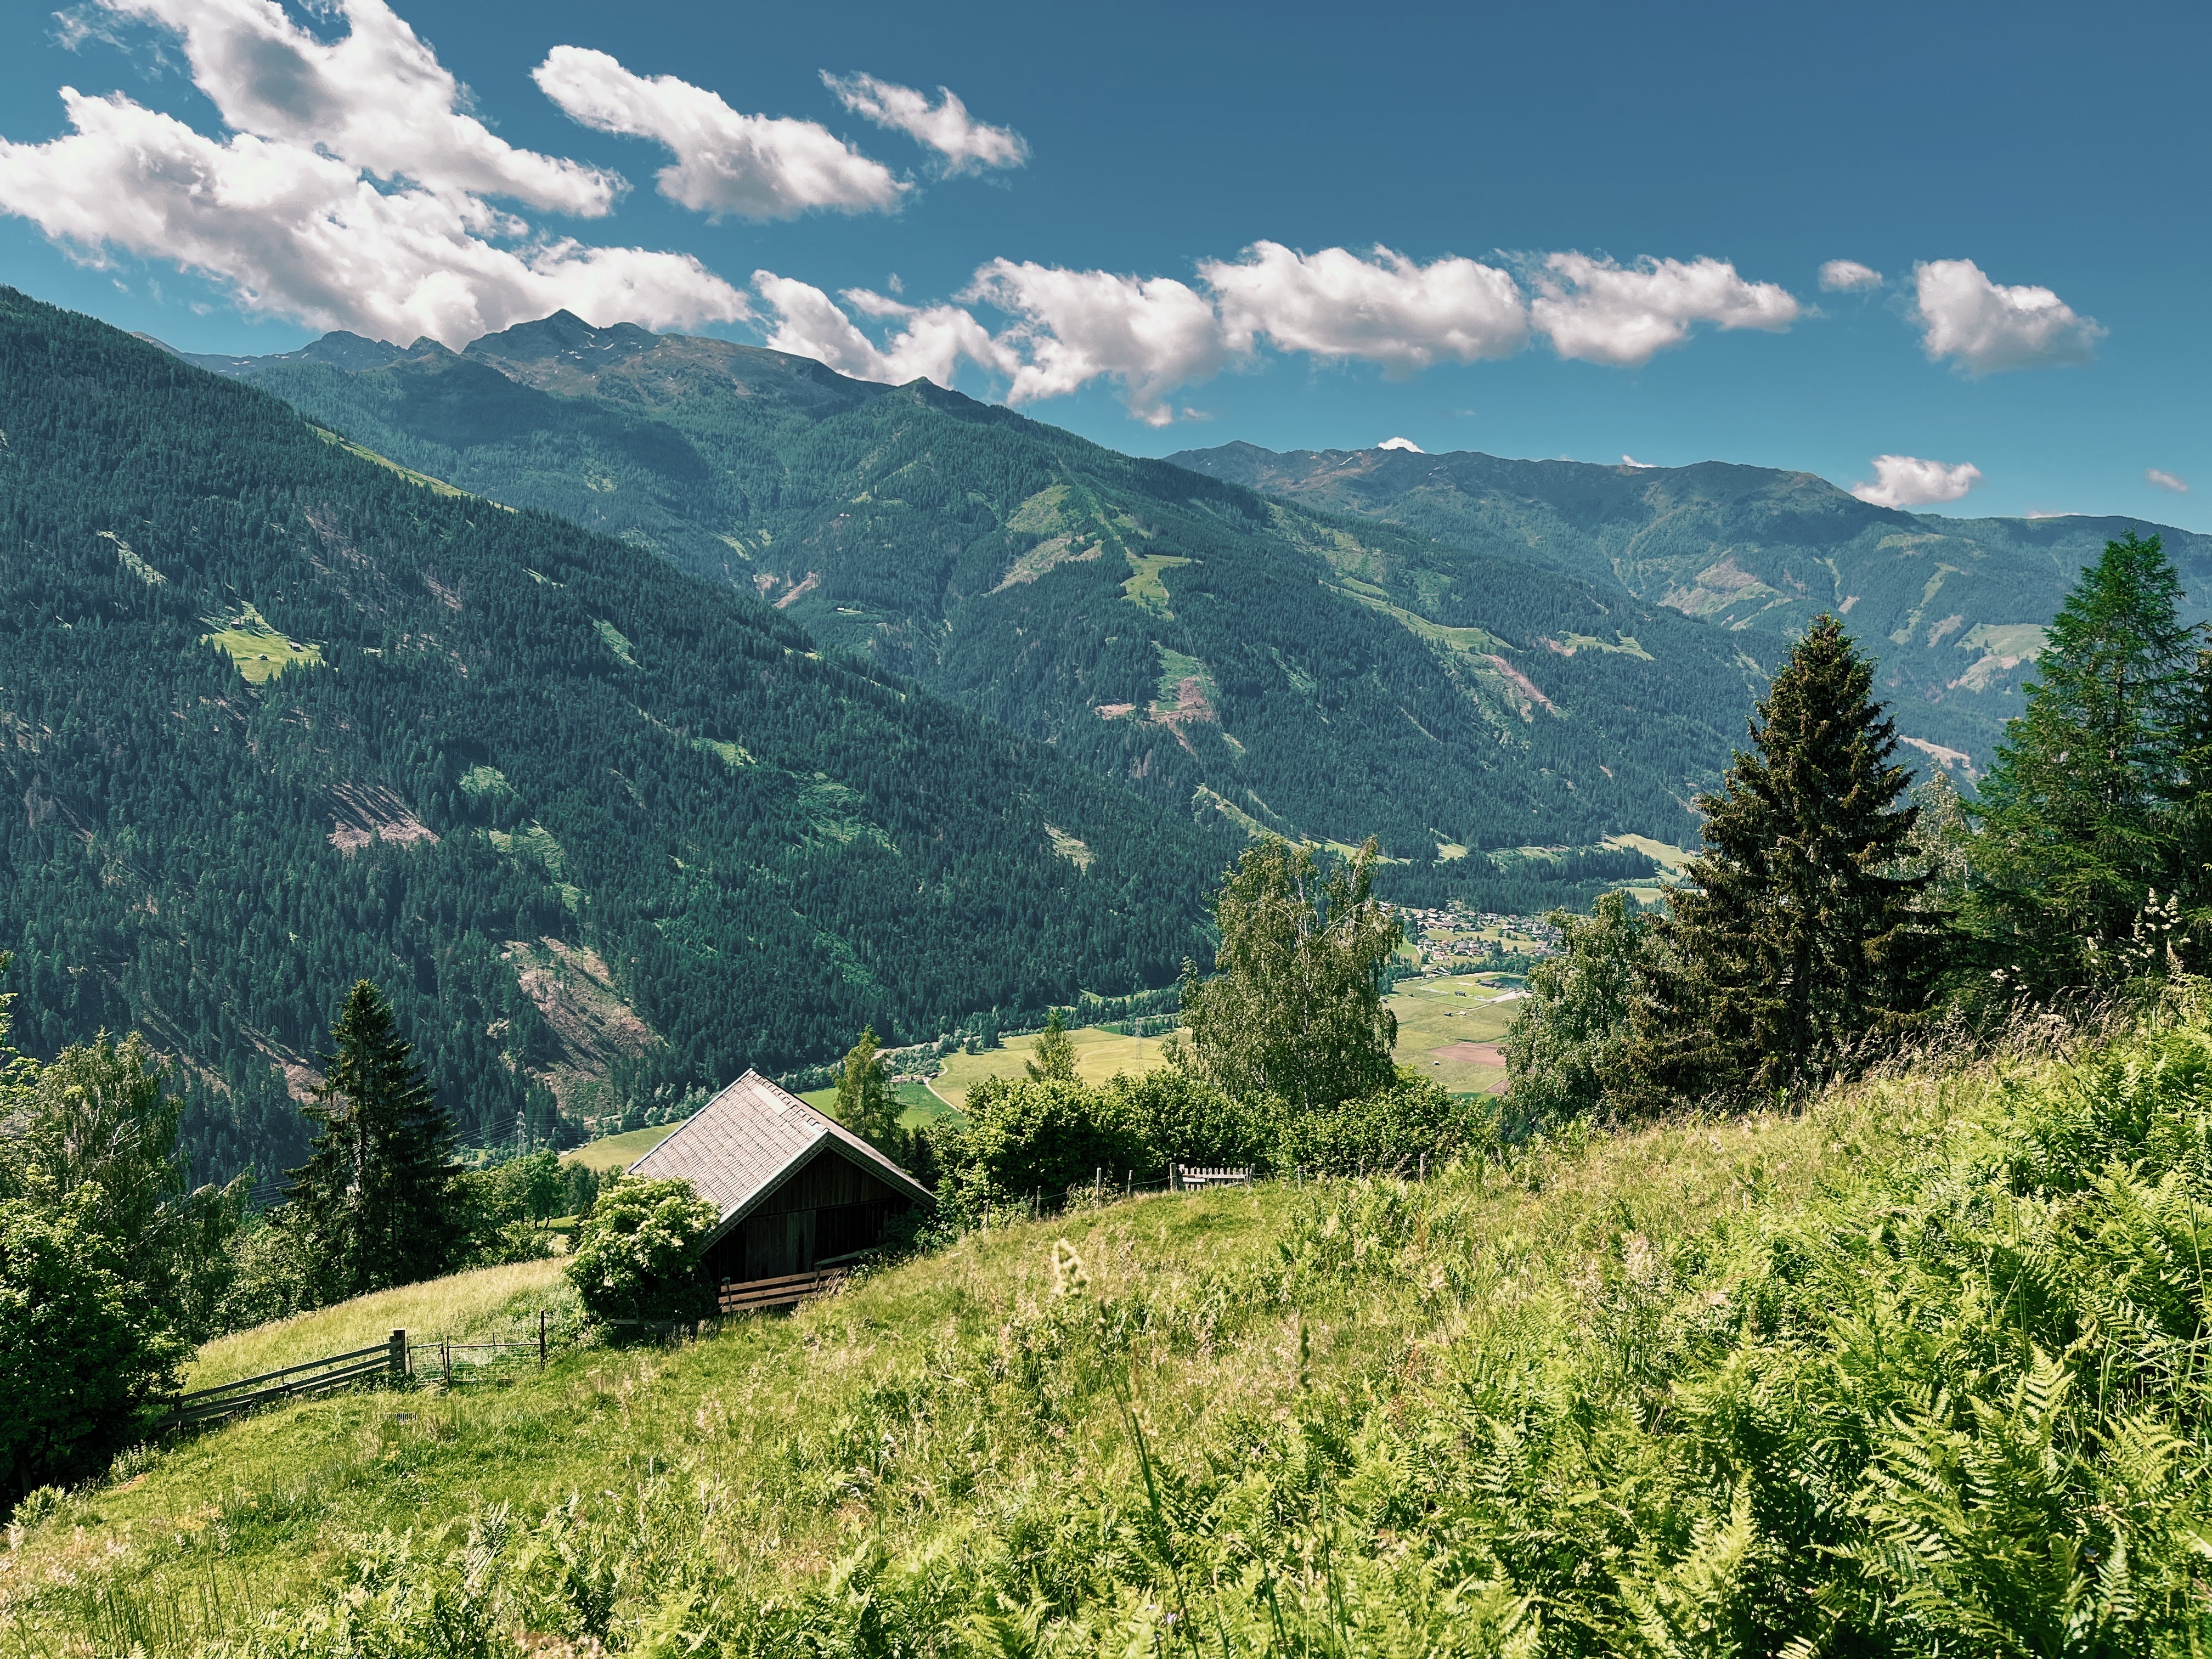 View of Small Mountain Hut and Möll Valley in Austria while Hiking the Alpe Adria Trail